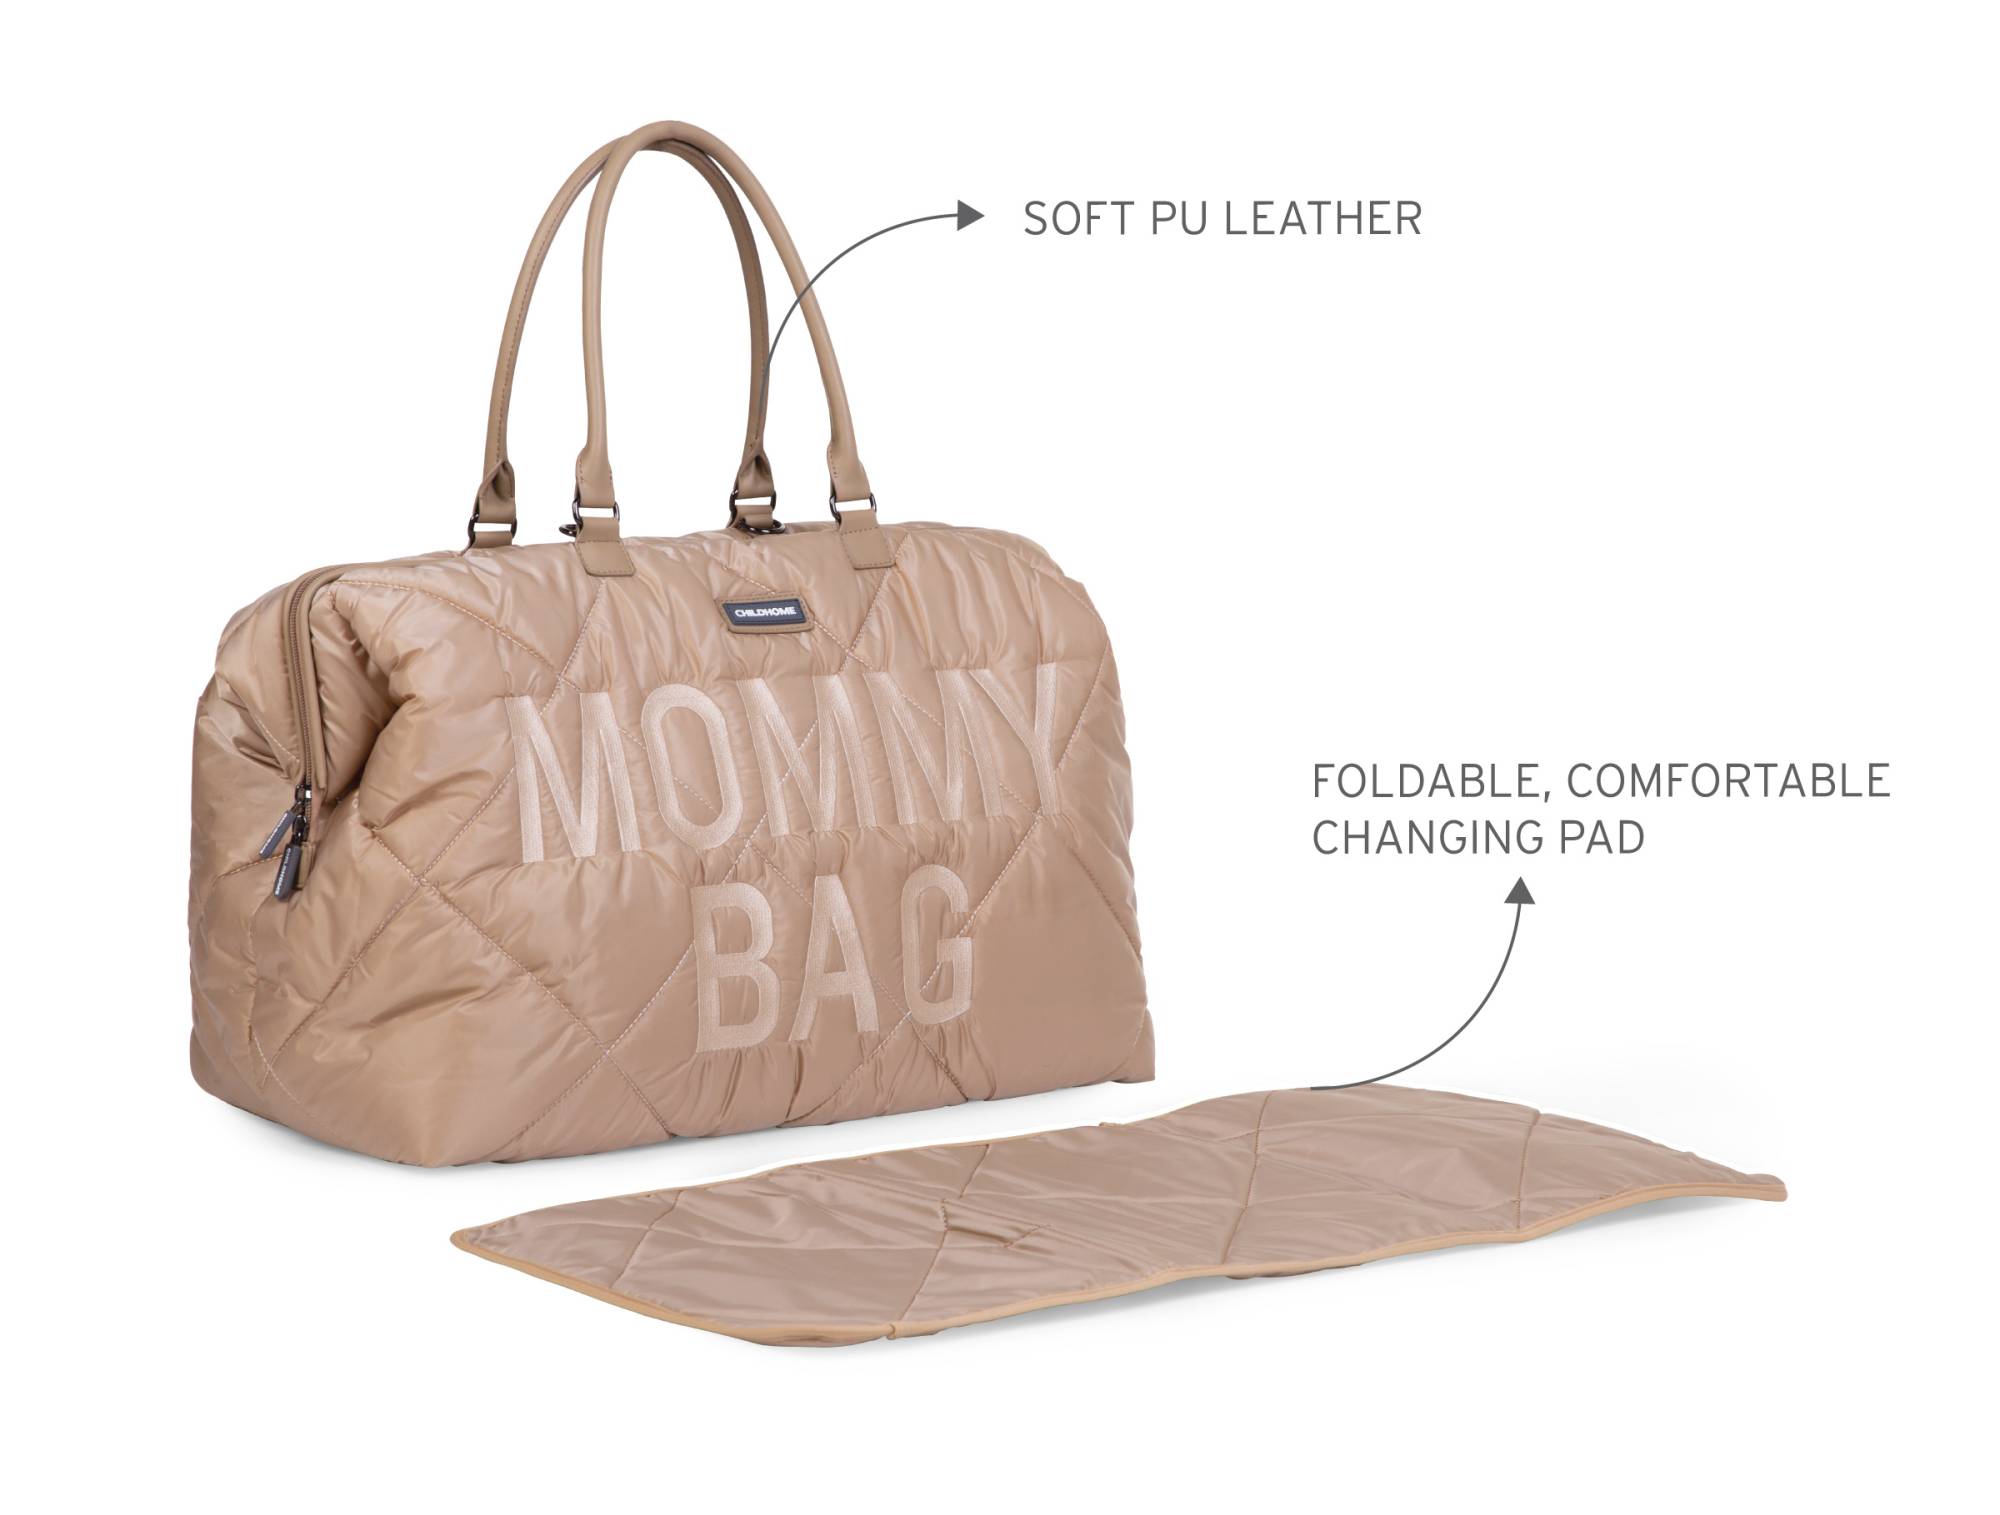 CHILDHOME Mommy Bag - Pink/Copper  Mamatoto - Mother & Child Lifestyle Shop